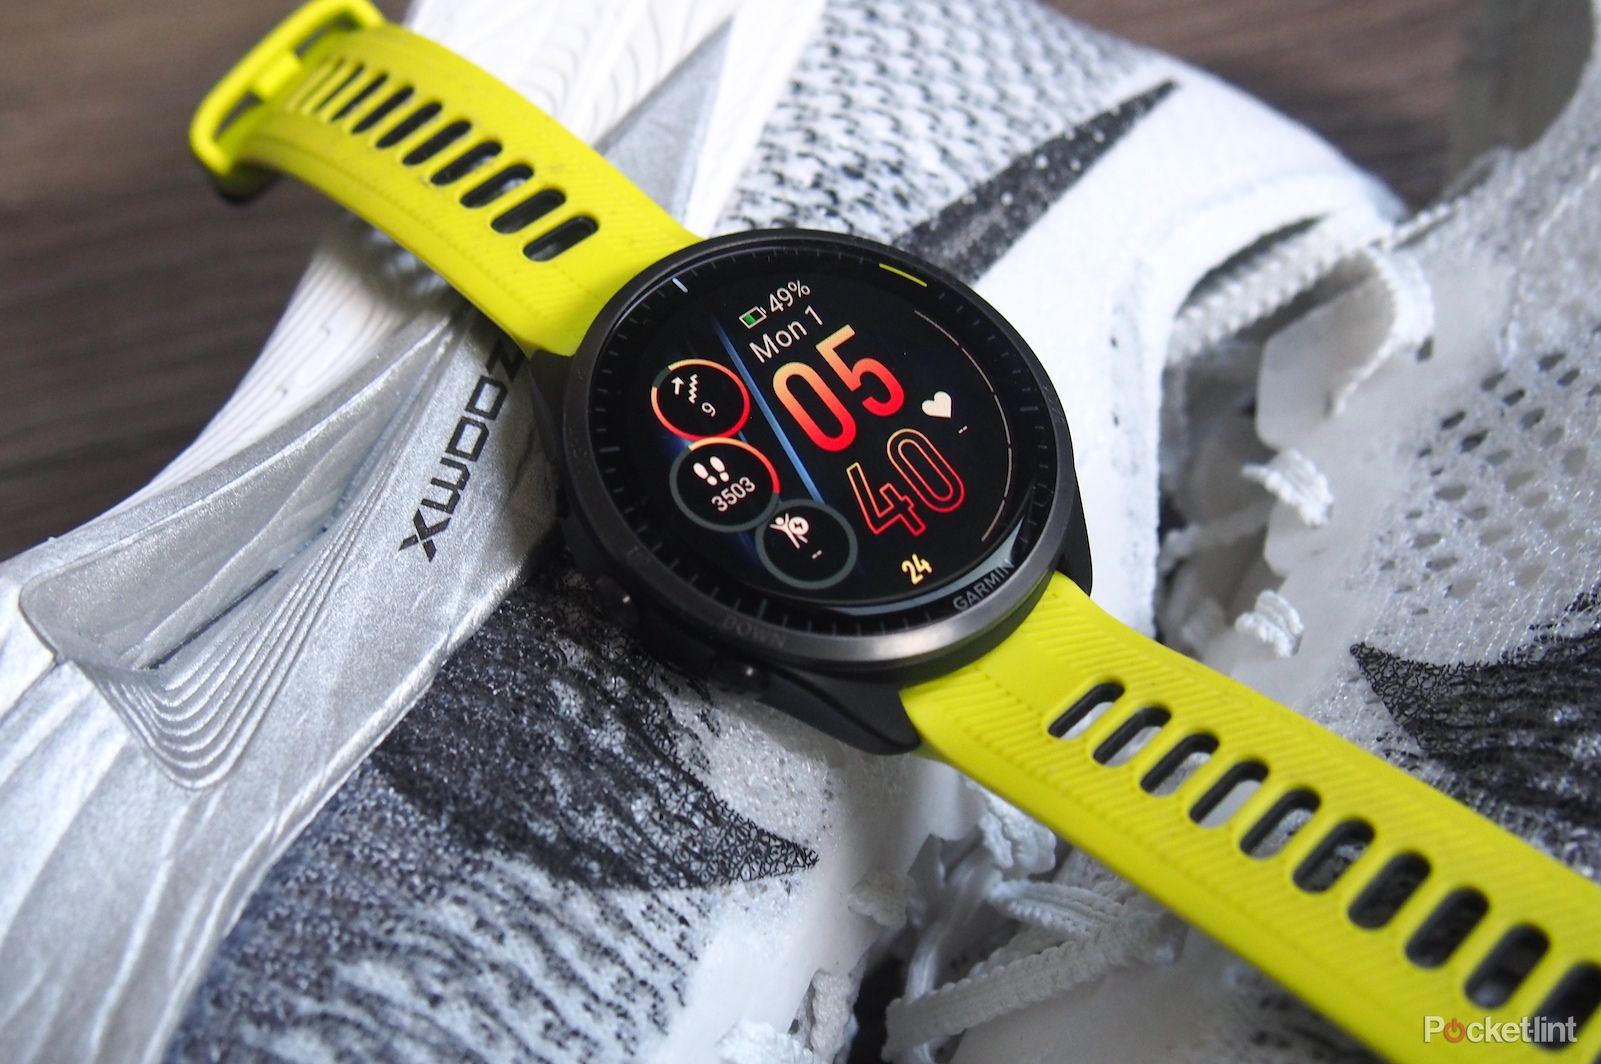 Best Garmin: Ranking the top Garmin GPS sports watches, smartwatches and activity trackers